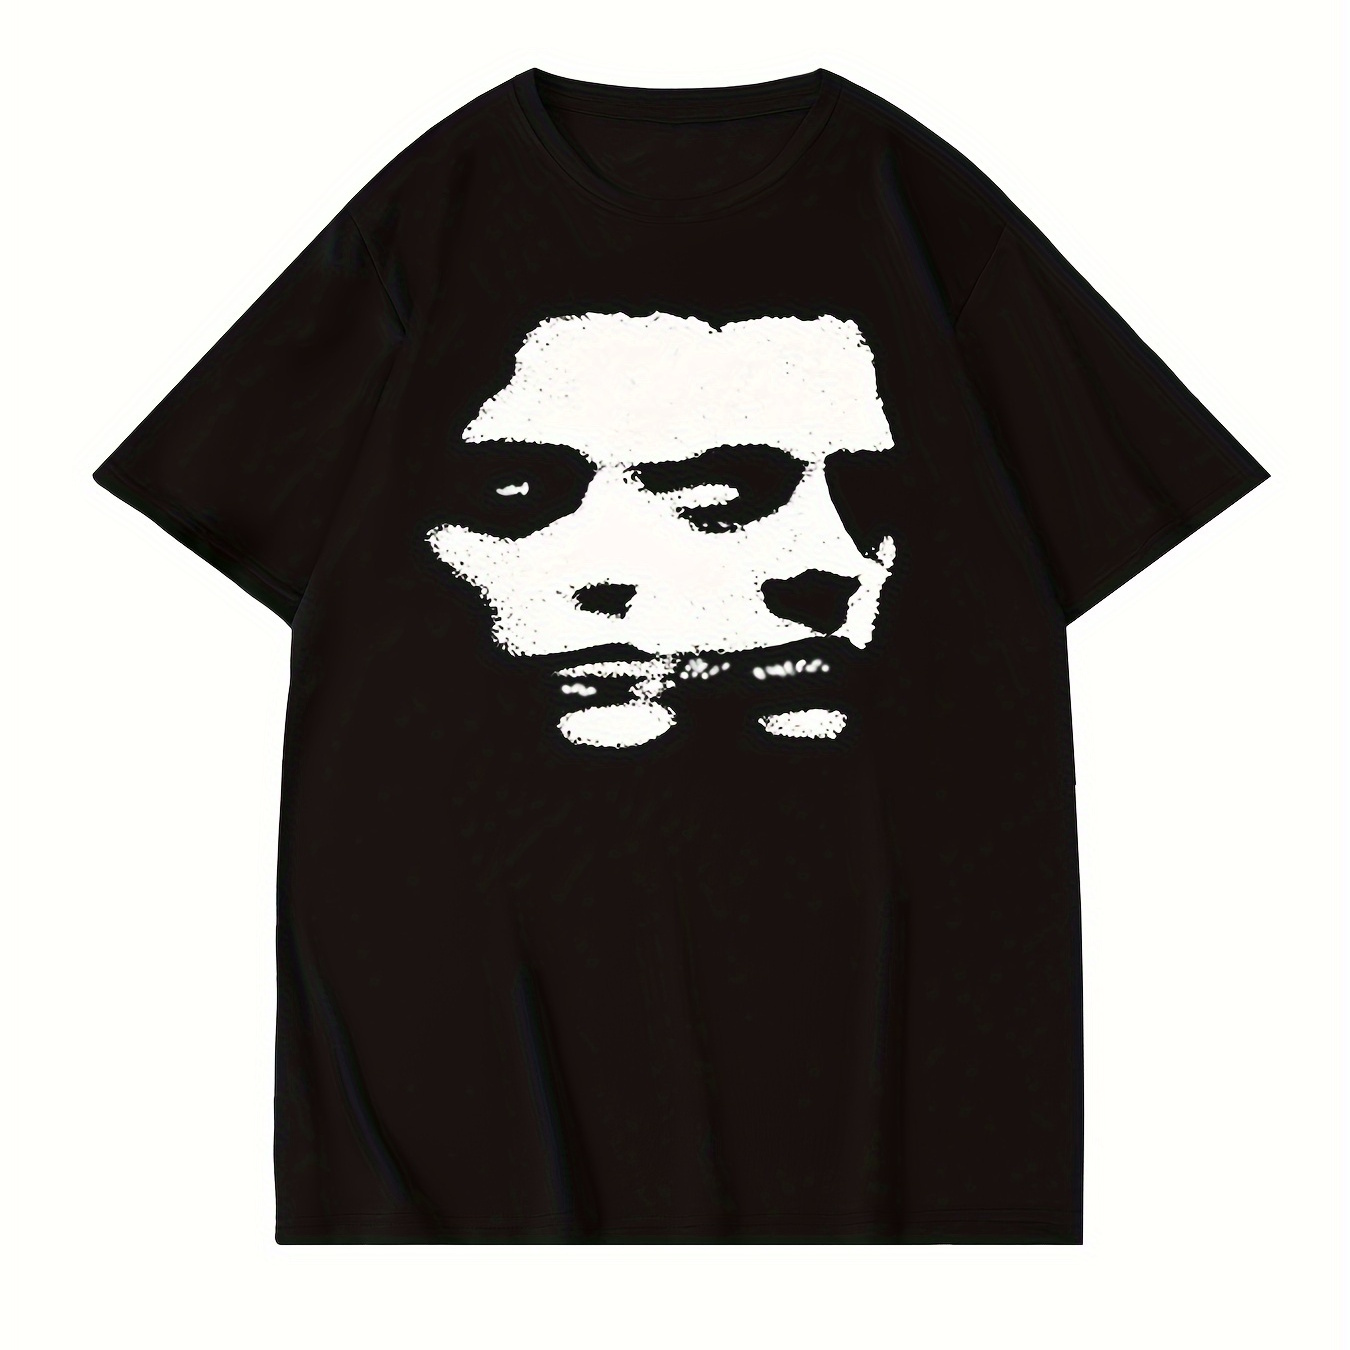 

Faces Print T Shirt, Tees For Men, Casual Short Sleeve T-shirt For Summer